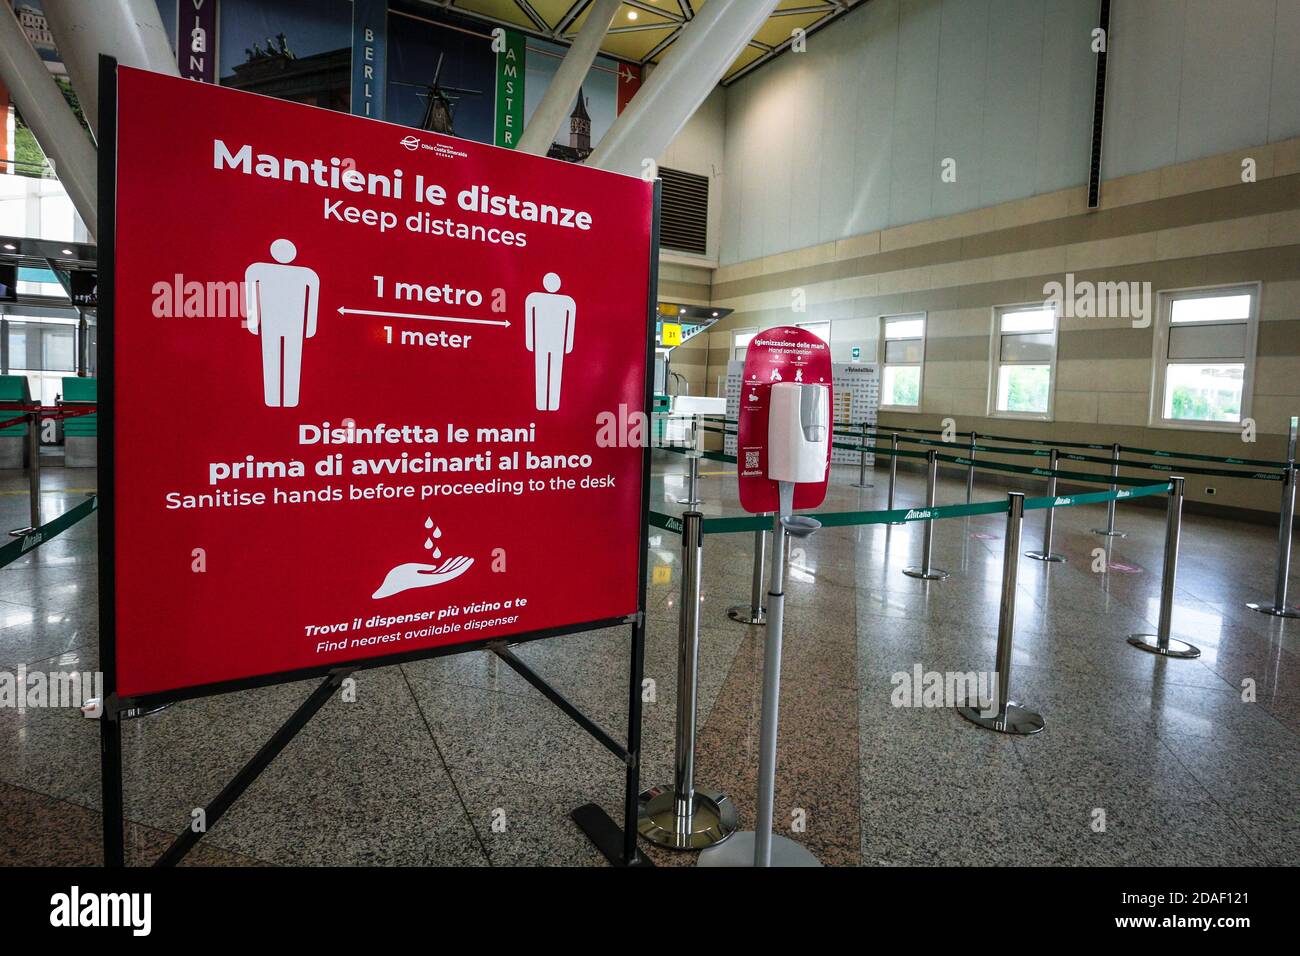 Sign at Olbia airport in Sardinia, Italy, reminds passengers to keep social distance and disinfect hands during coronavirus crisis in Italy. Stock Photo